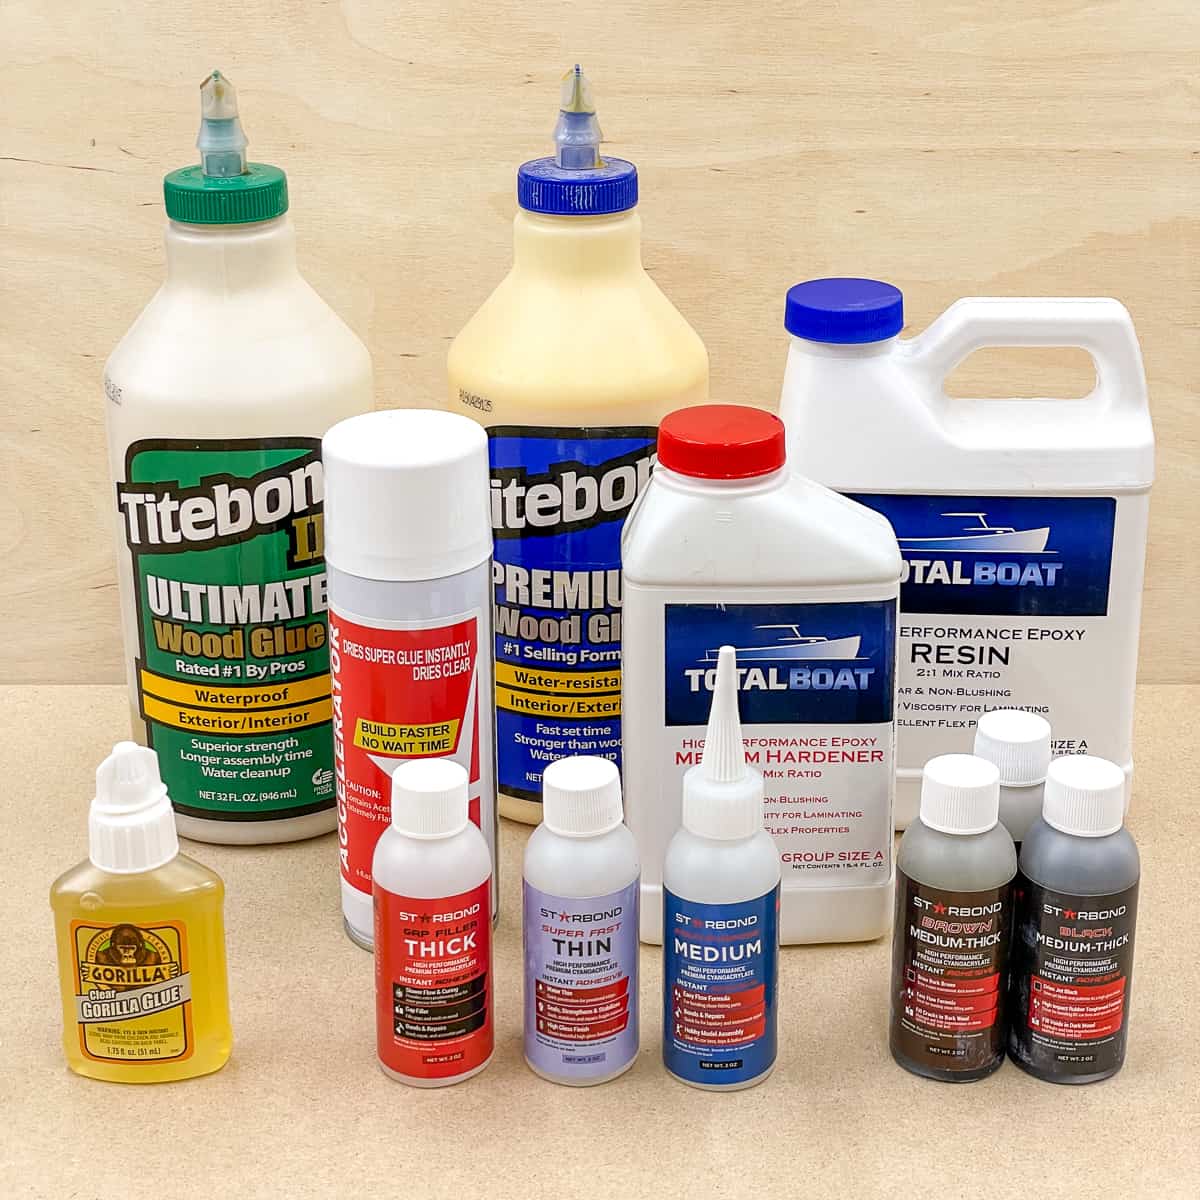 Choosing a Super Glue for Different Types of Plastic